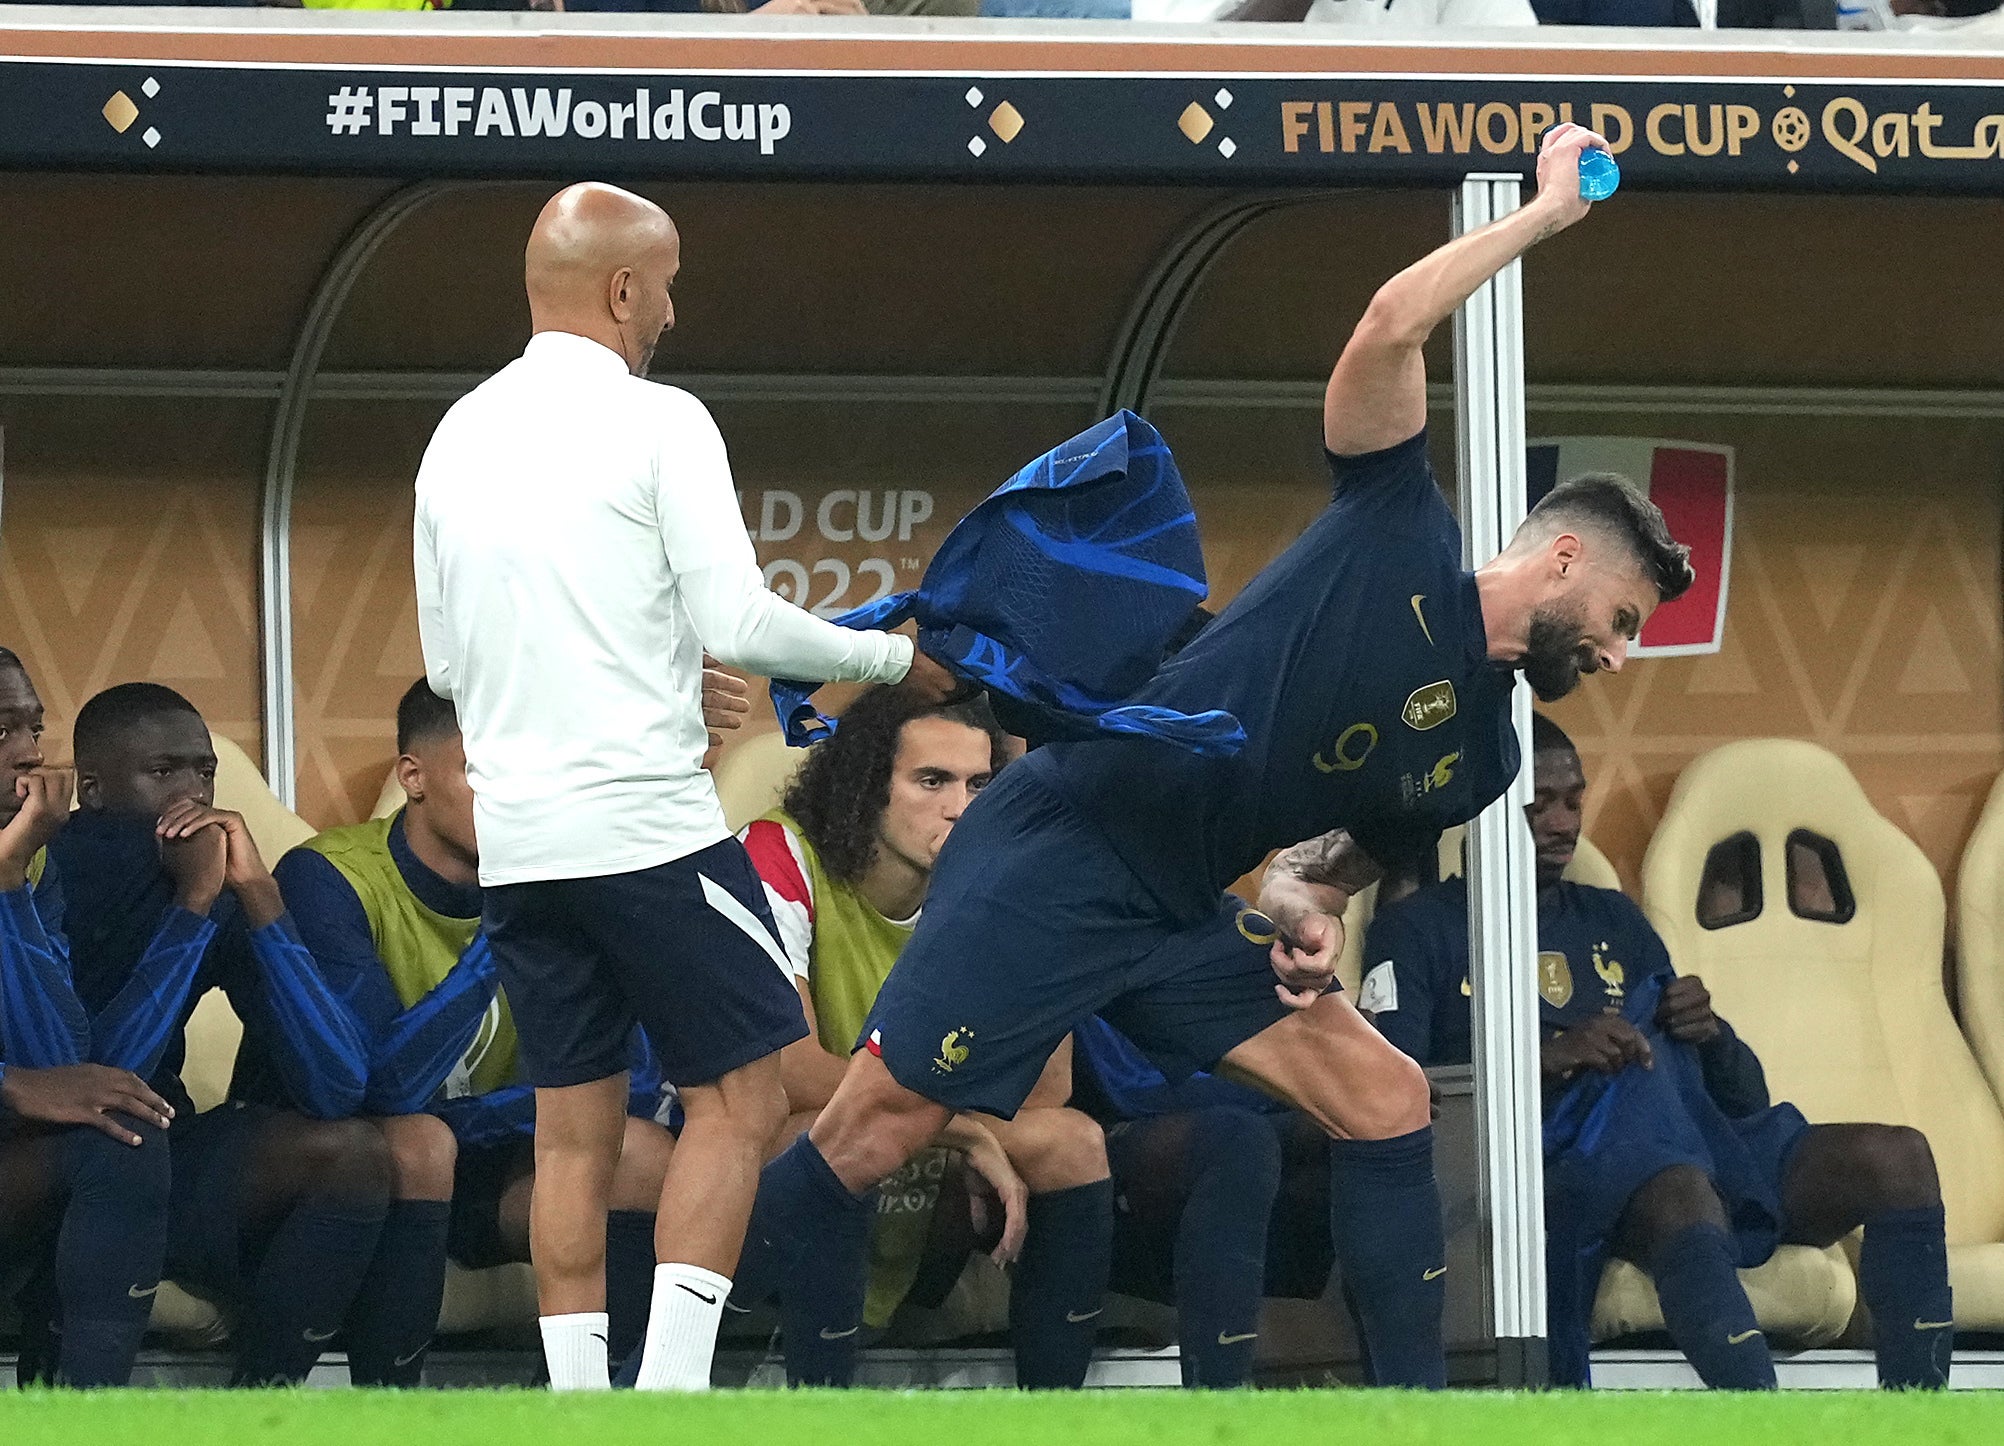 Giroud throwing a bottle after being substituted off